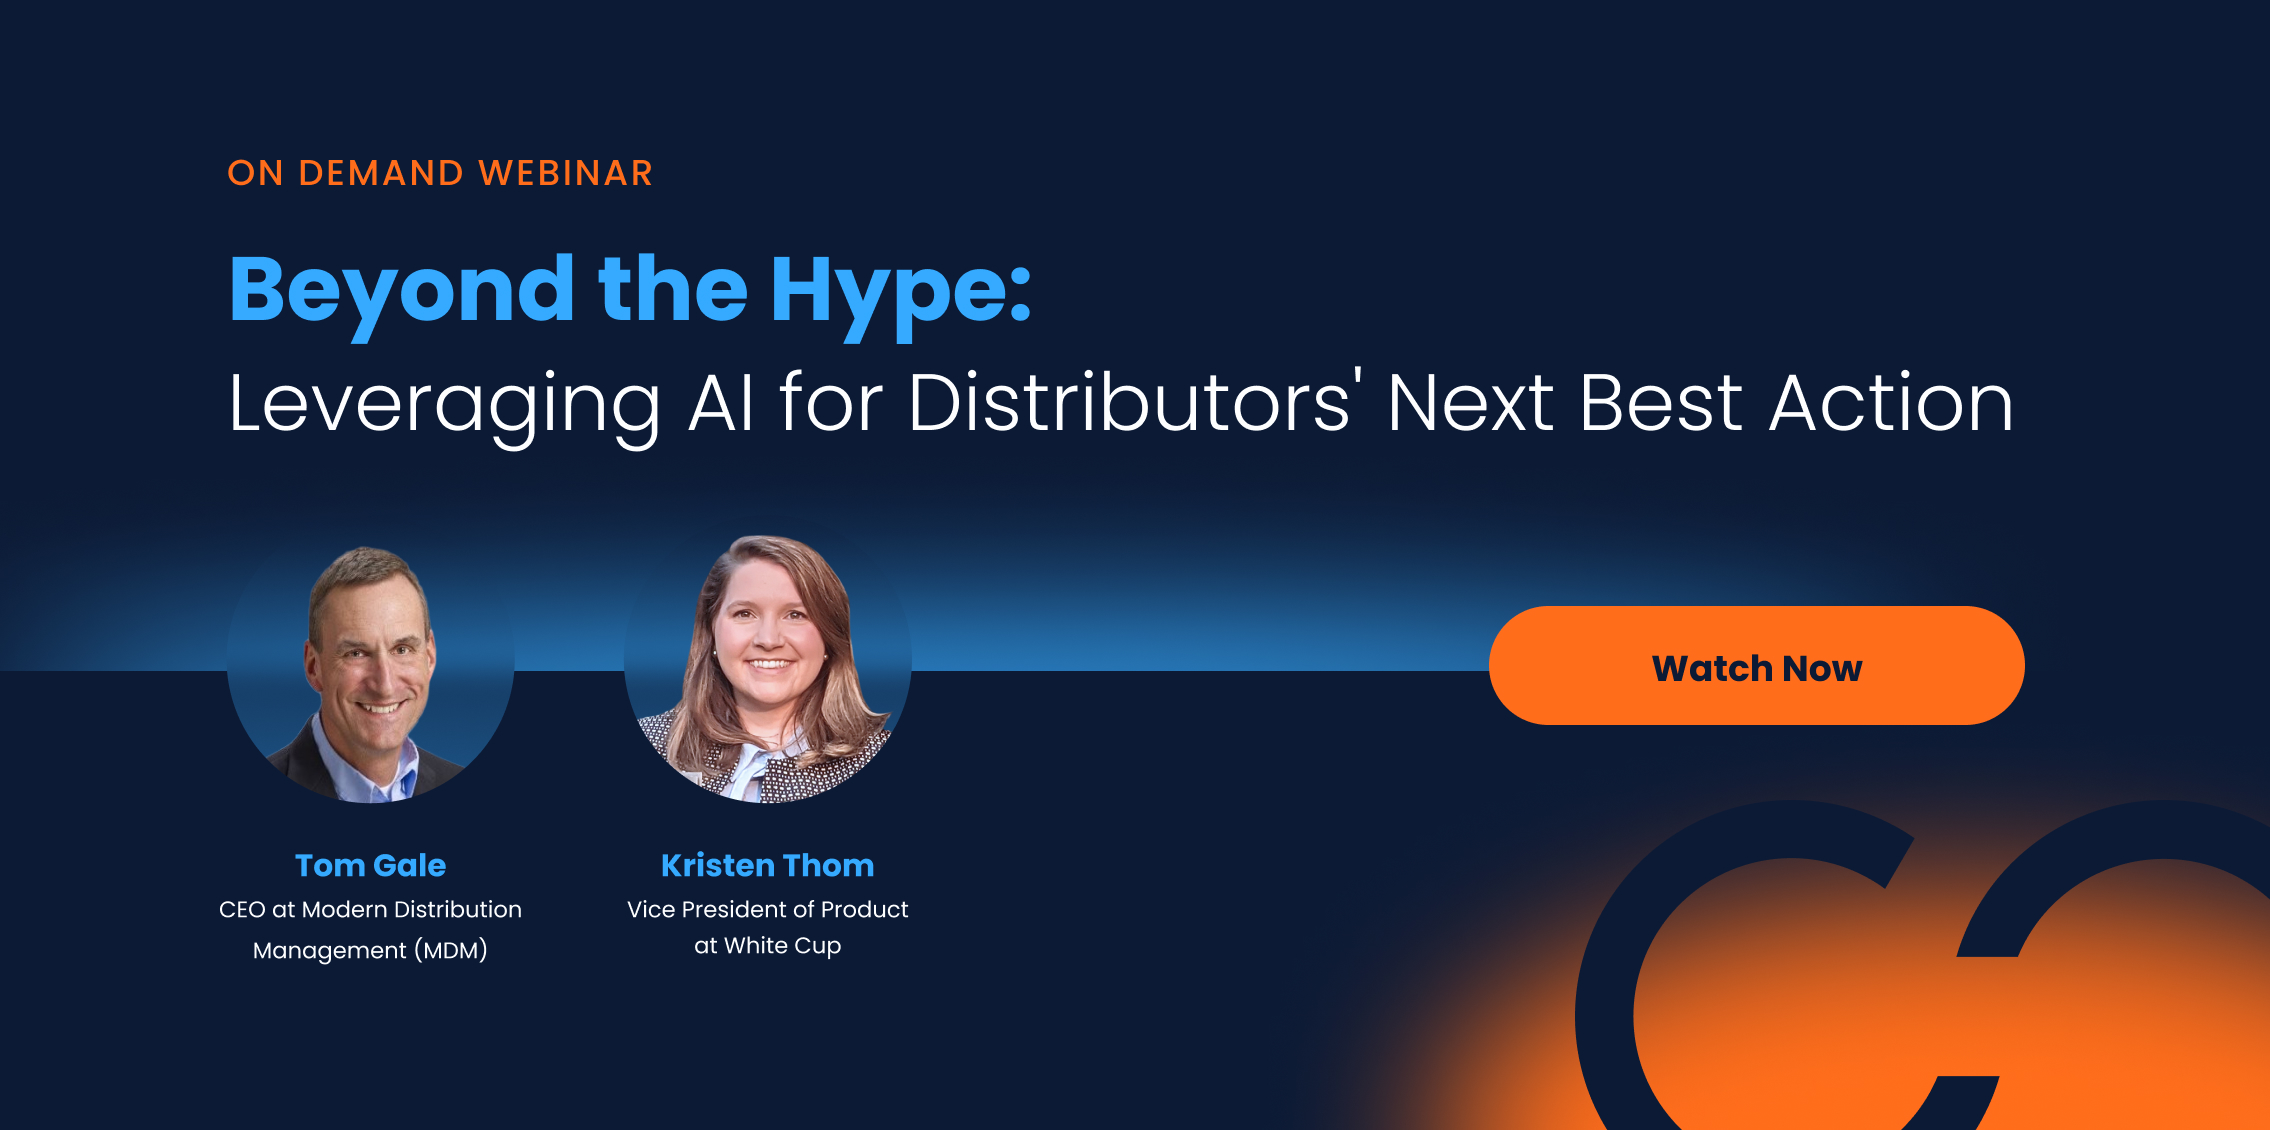 Leveraging AI for distributors' next best actions